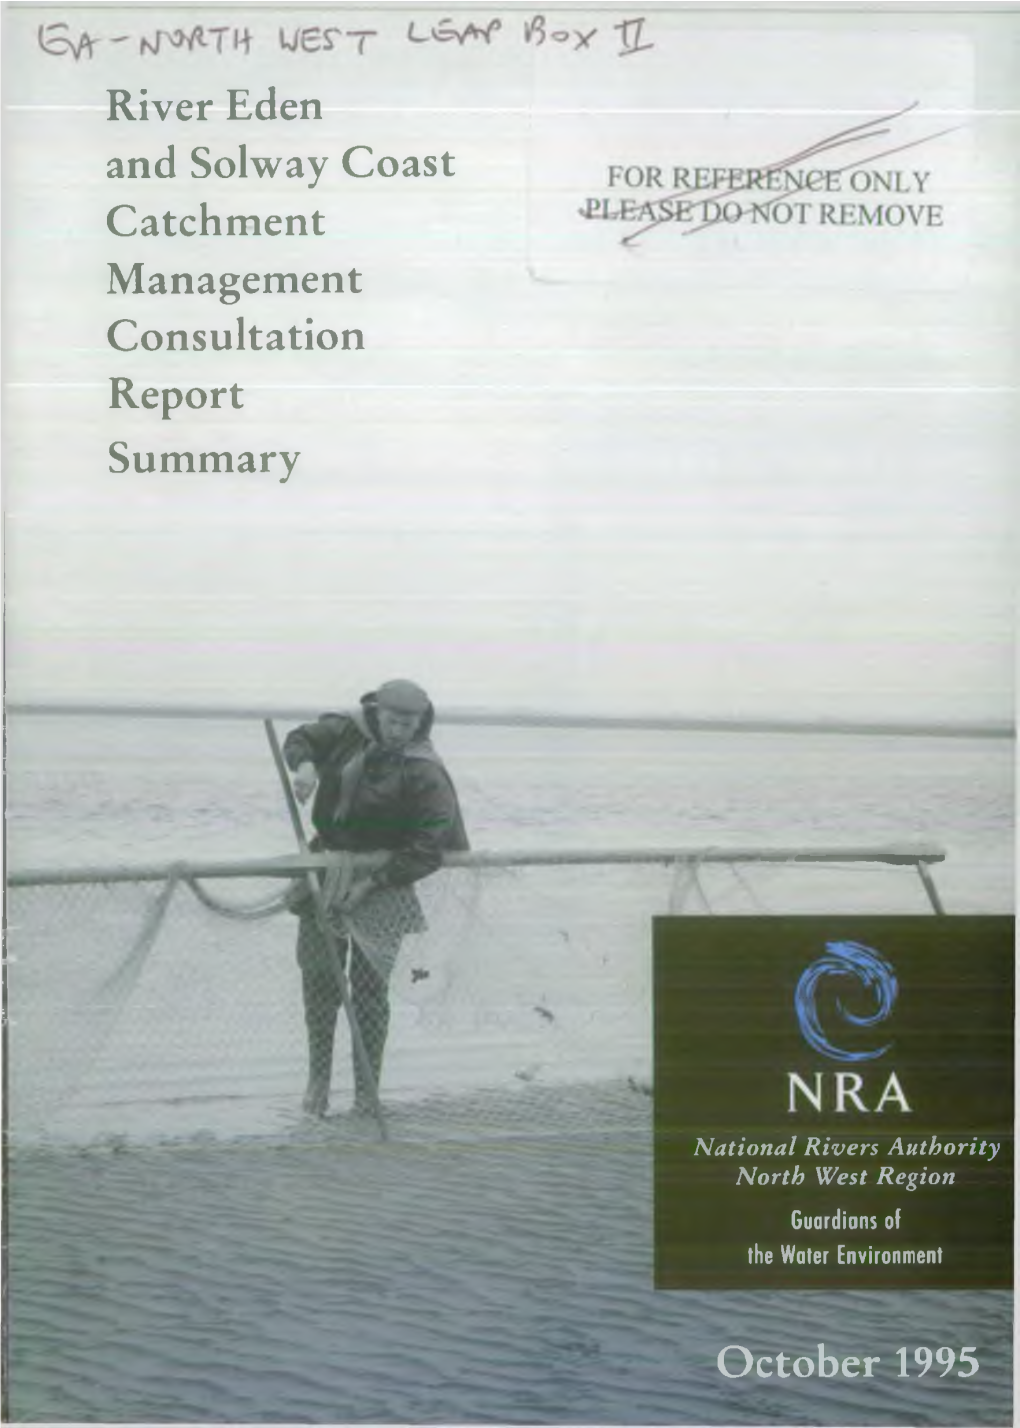 River Eden and Solway Coast Catchment Management Consultation Report Summary